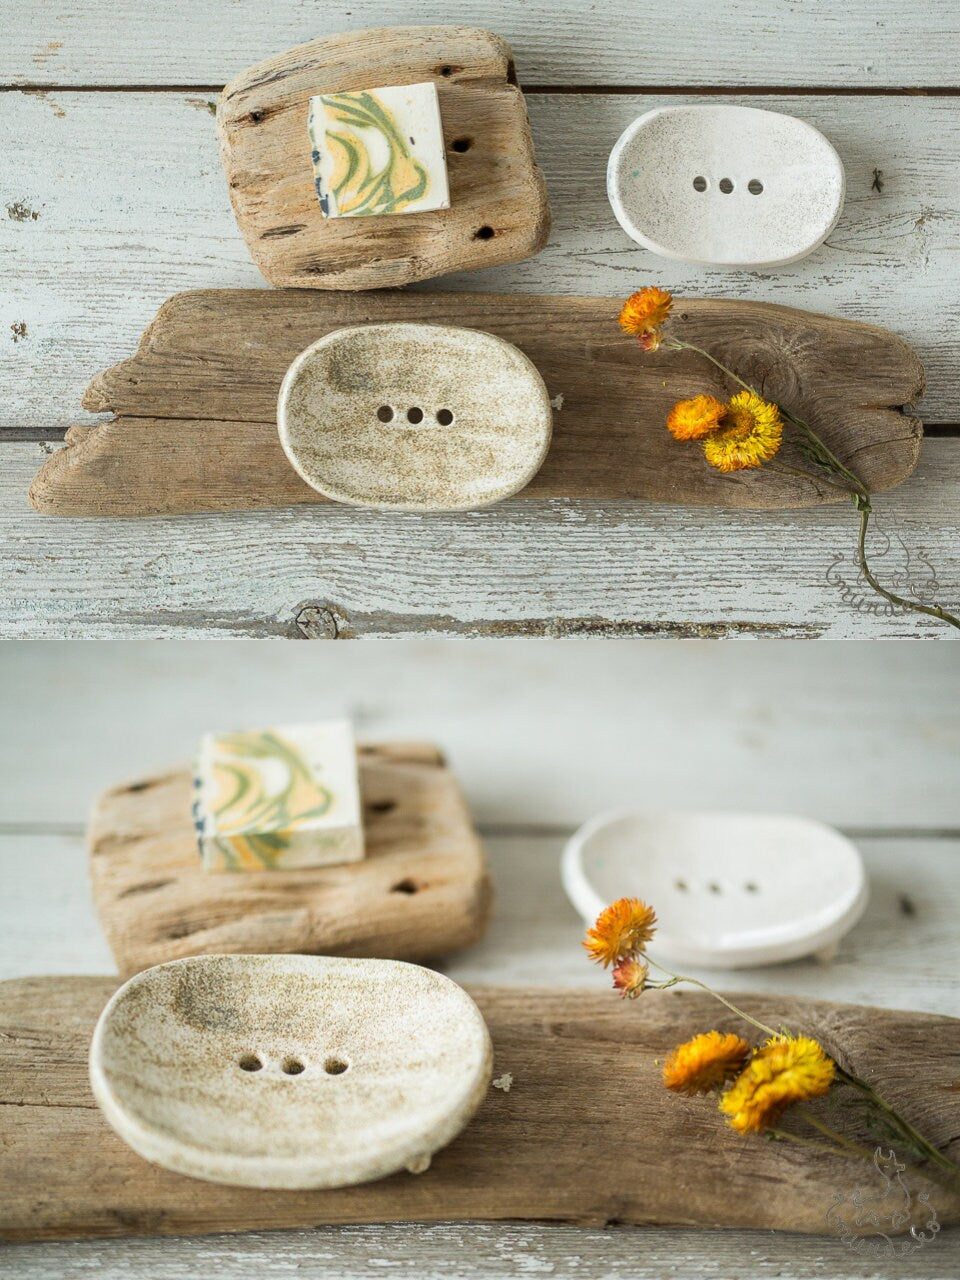 Rustic soap dish with drain - Pottery soap tray with holes - Handmade soap dish - Oval sponge holder